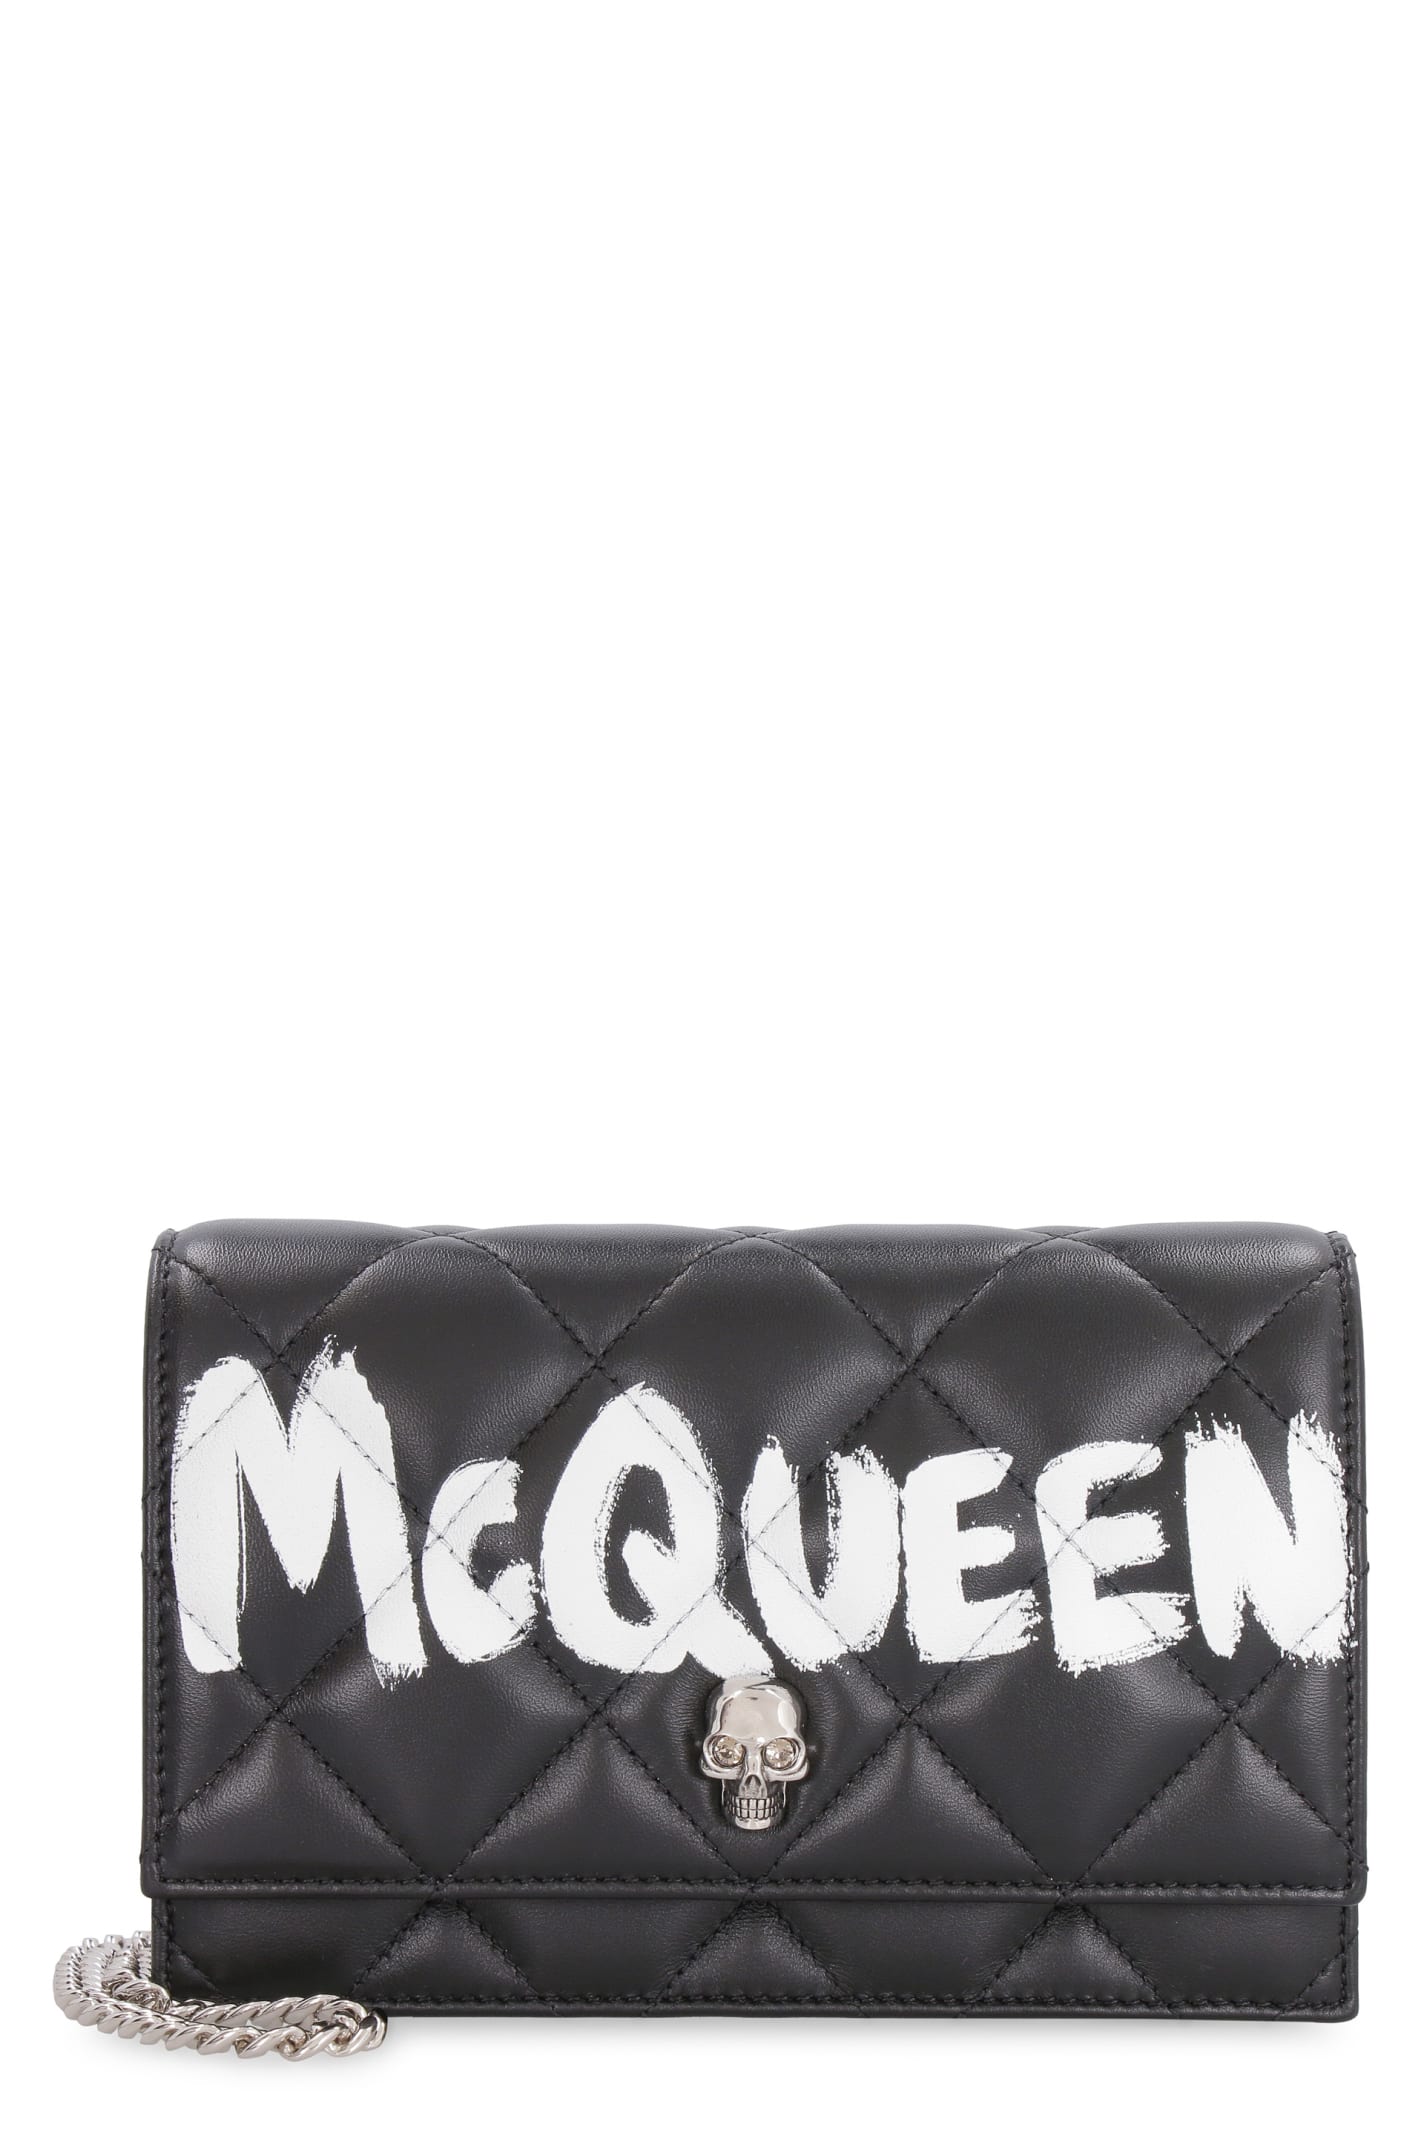 Alexander McQueen Skull Quilted Leather Bag